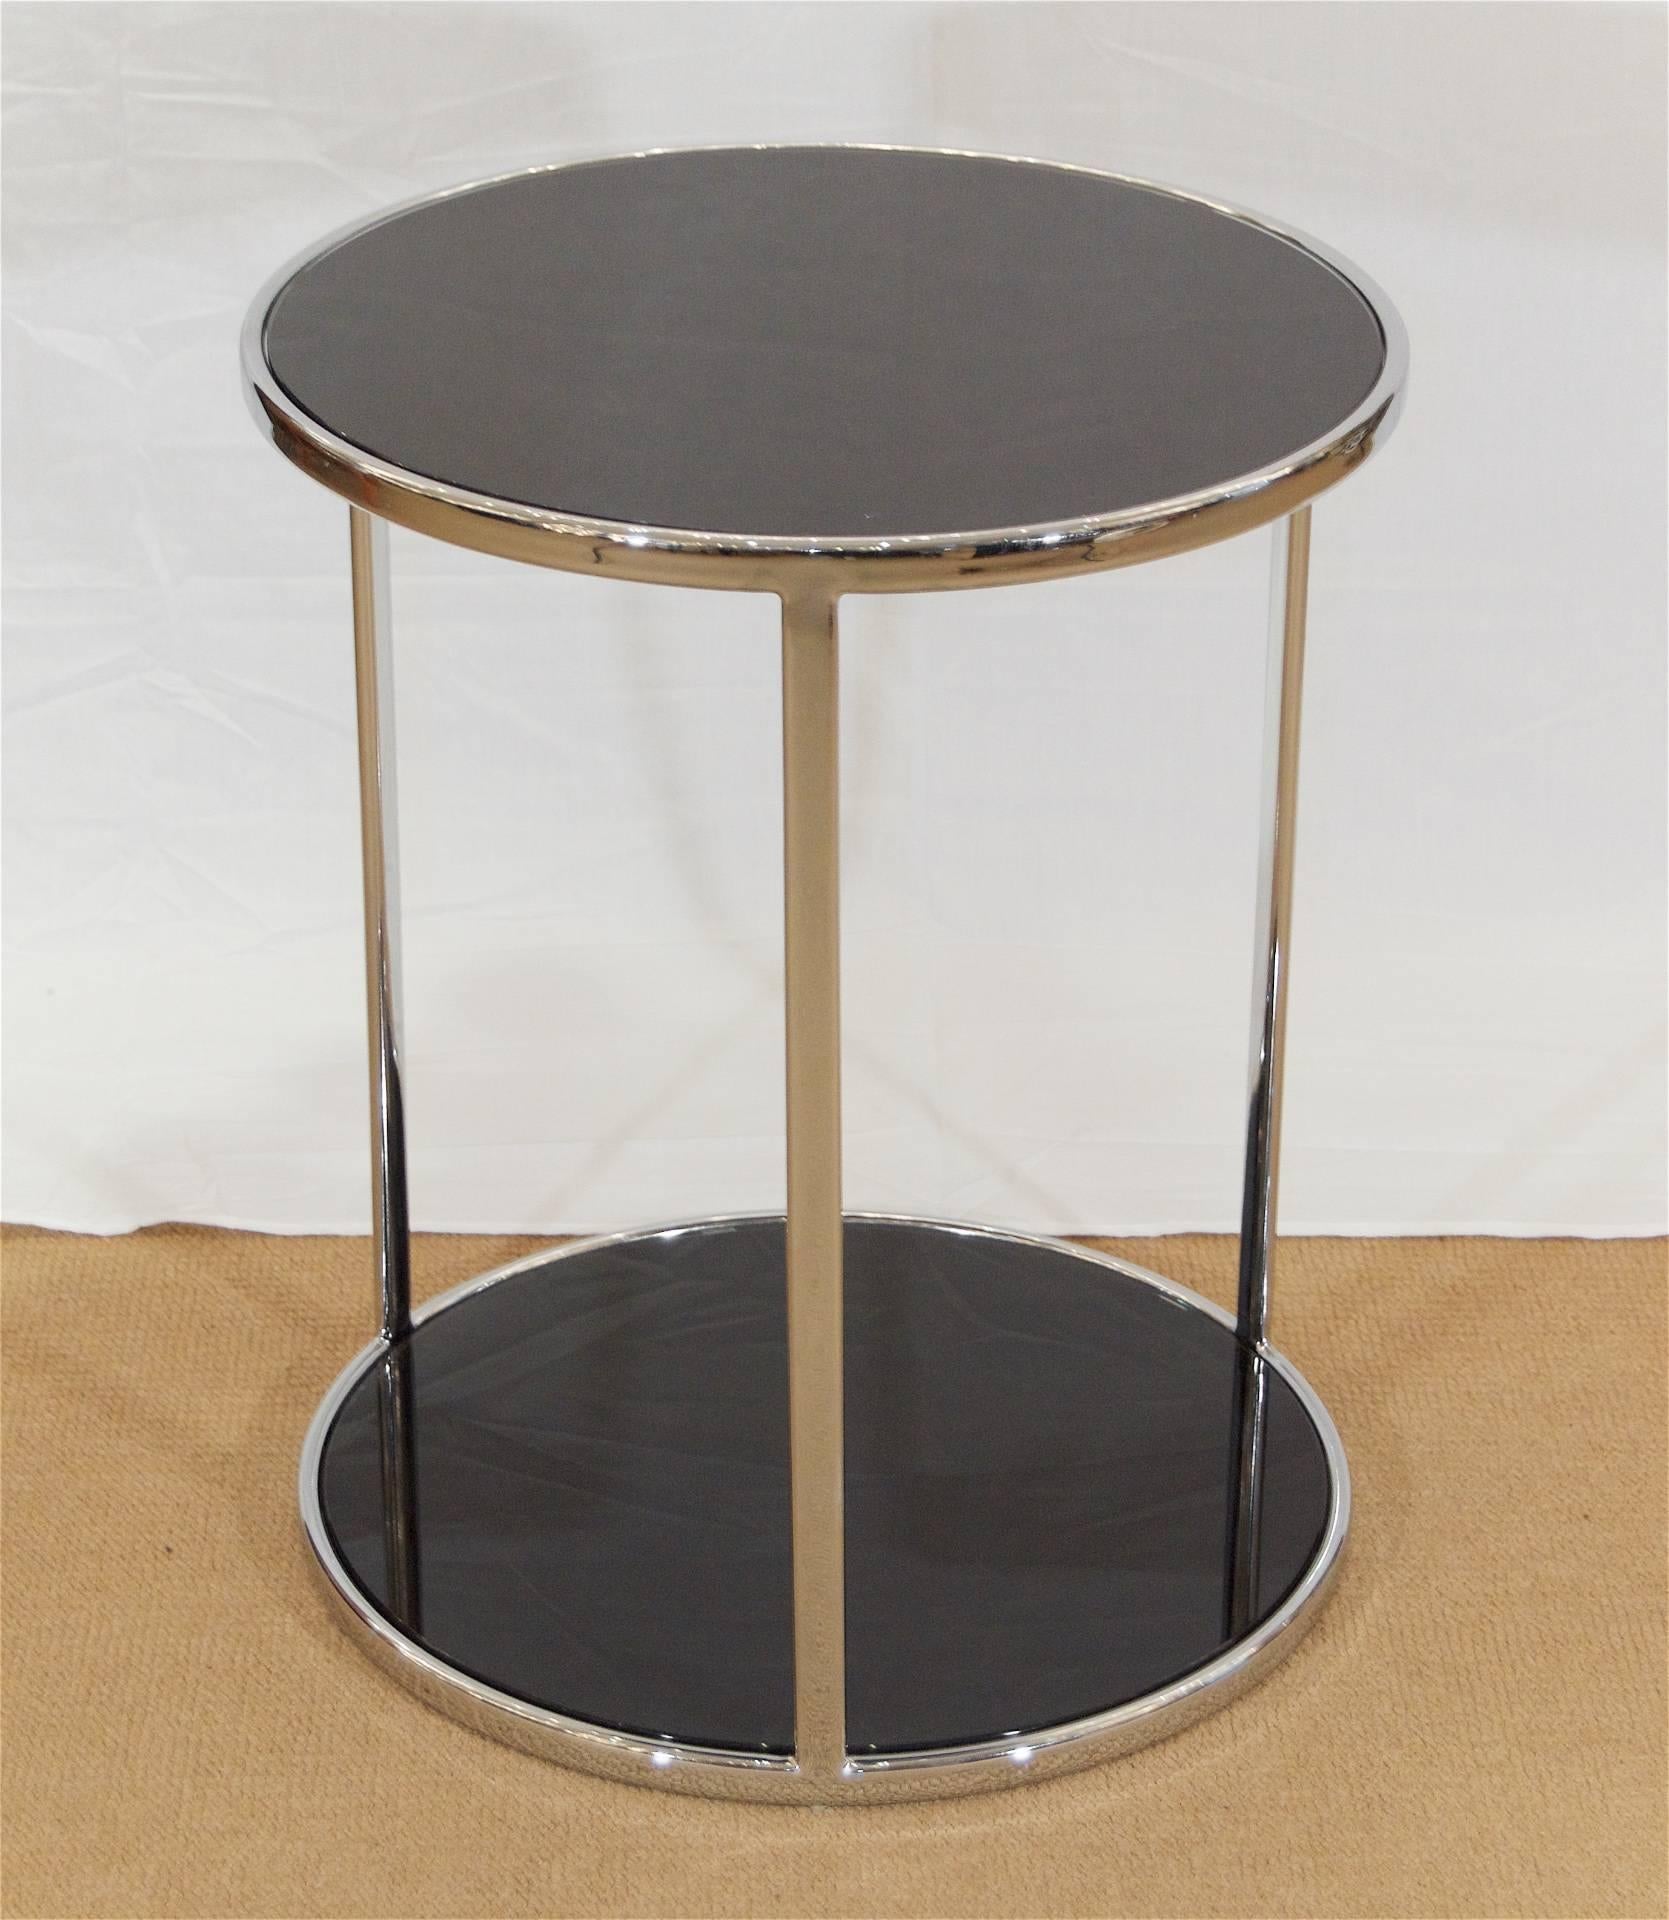 Well-sized side or cocktail table in chromed steel with black back-painted glass inserts; excellent finish quality.